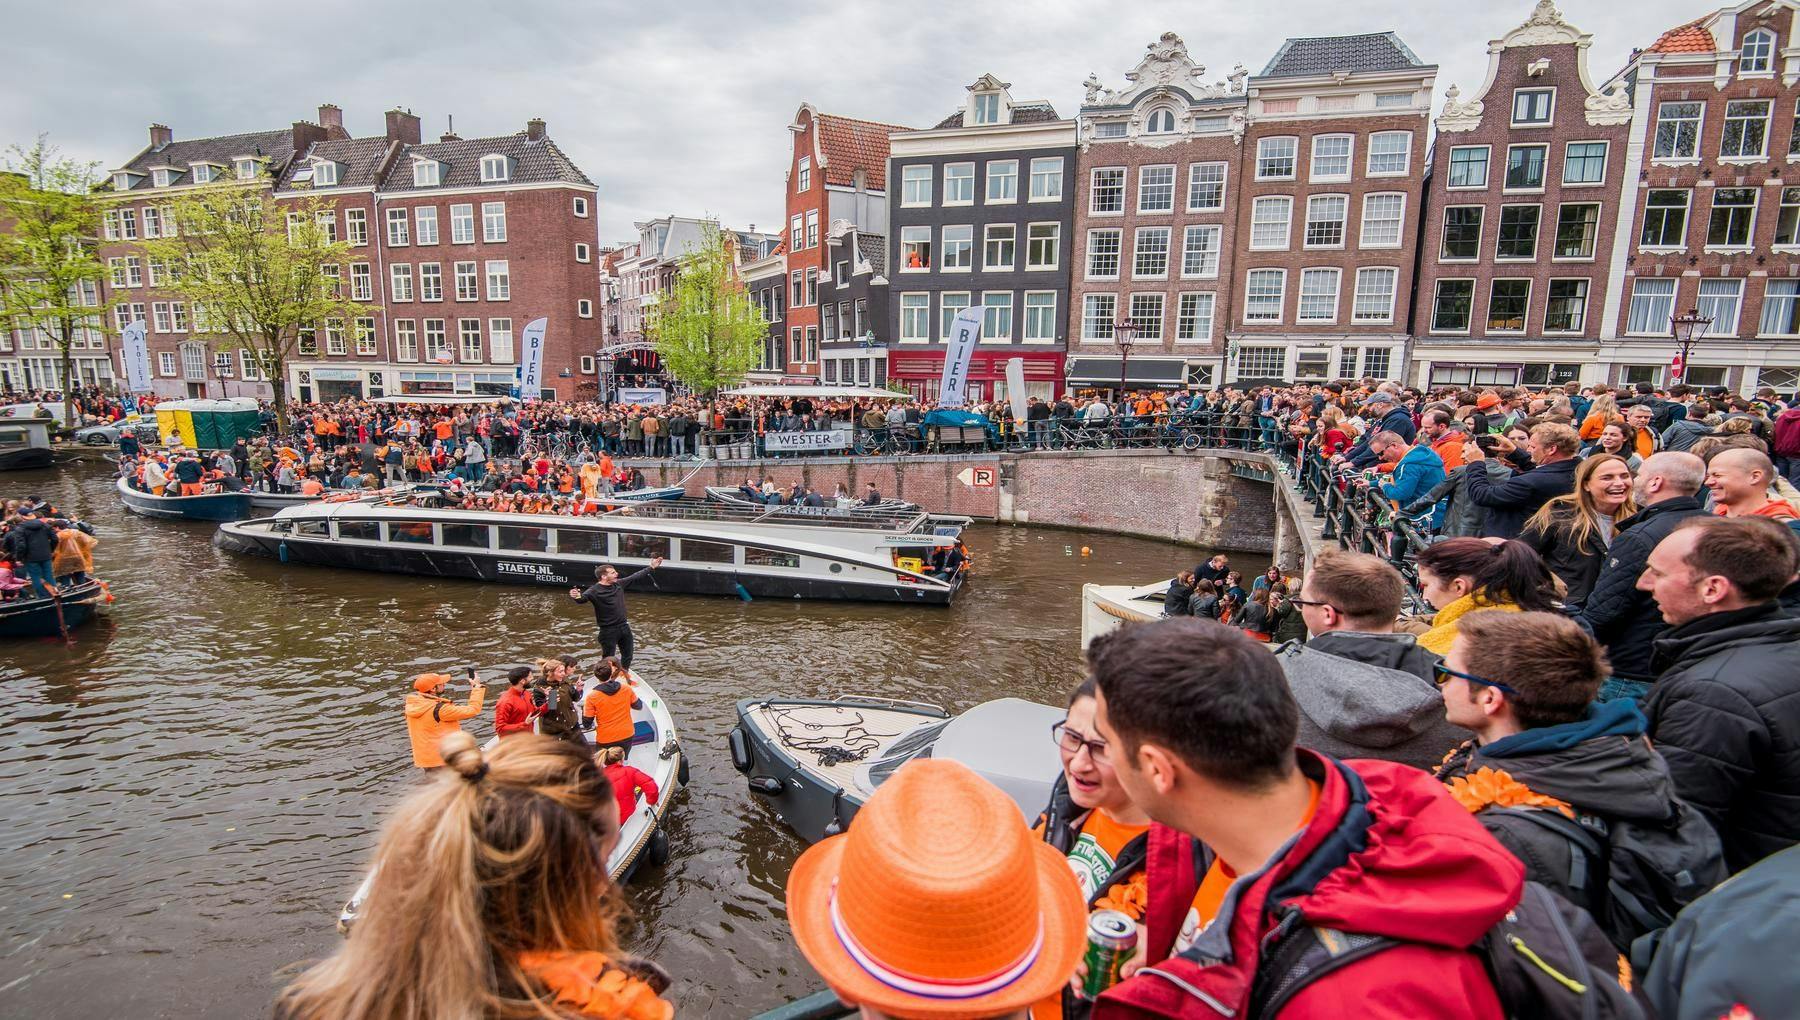 Koningsdag or King's Day is a national holiday in the Kingdom of the Netherlands. Celebrated on 27 April, the date marks the birth of King Willem-Alexander. 

Celebrations: Partying, wearing orange costumes, and traditional local gatherings.